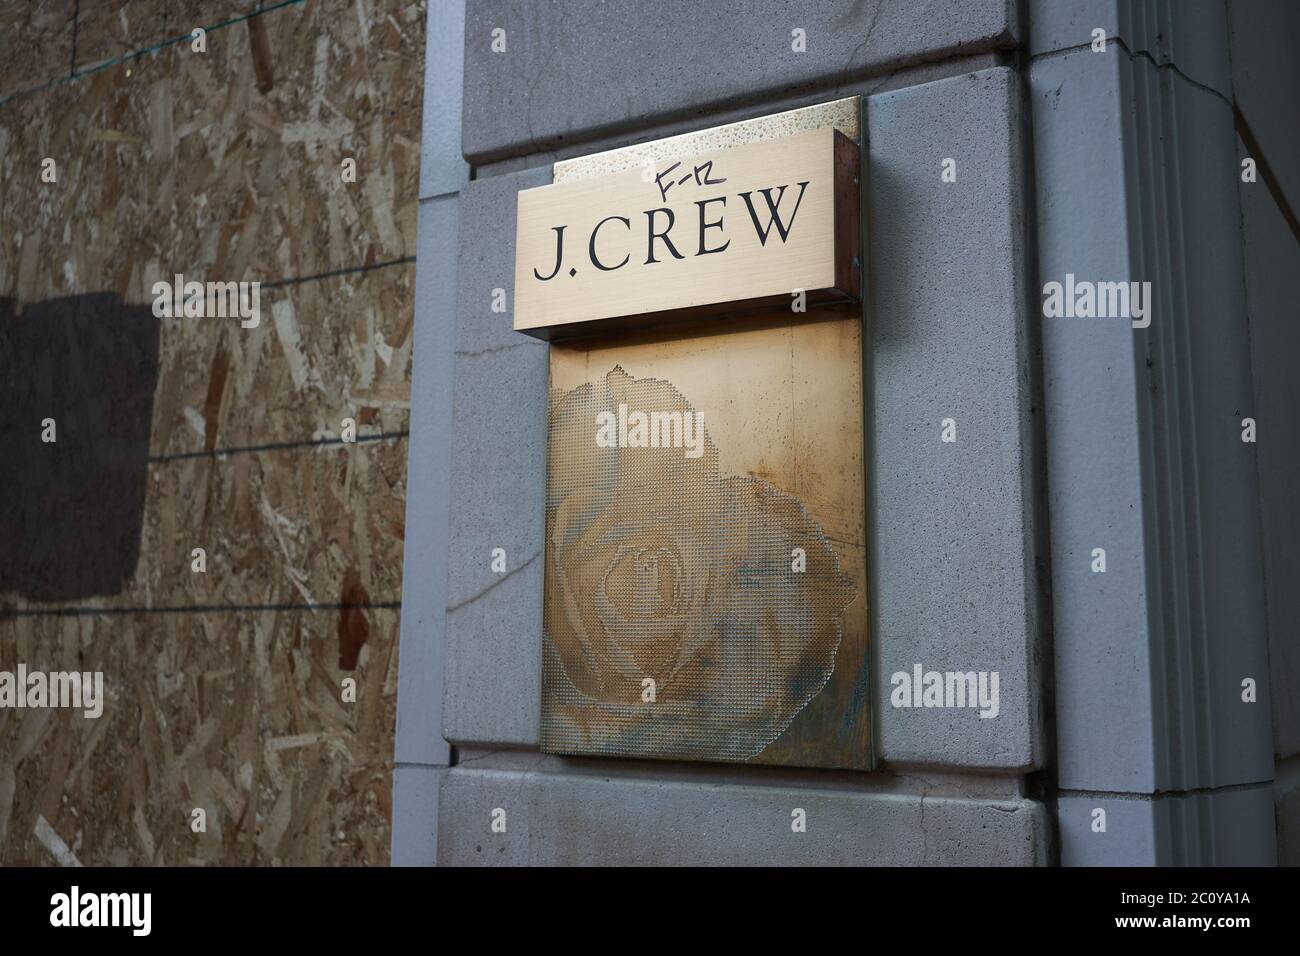 The J.Crew sign is seen outside the boarded-up J.Crew store in downtown Portland's Pioneer Place, on Friday, Jun 12, 2020, amid the ongoing protest. Stock Photo